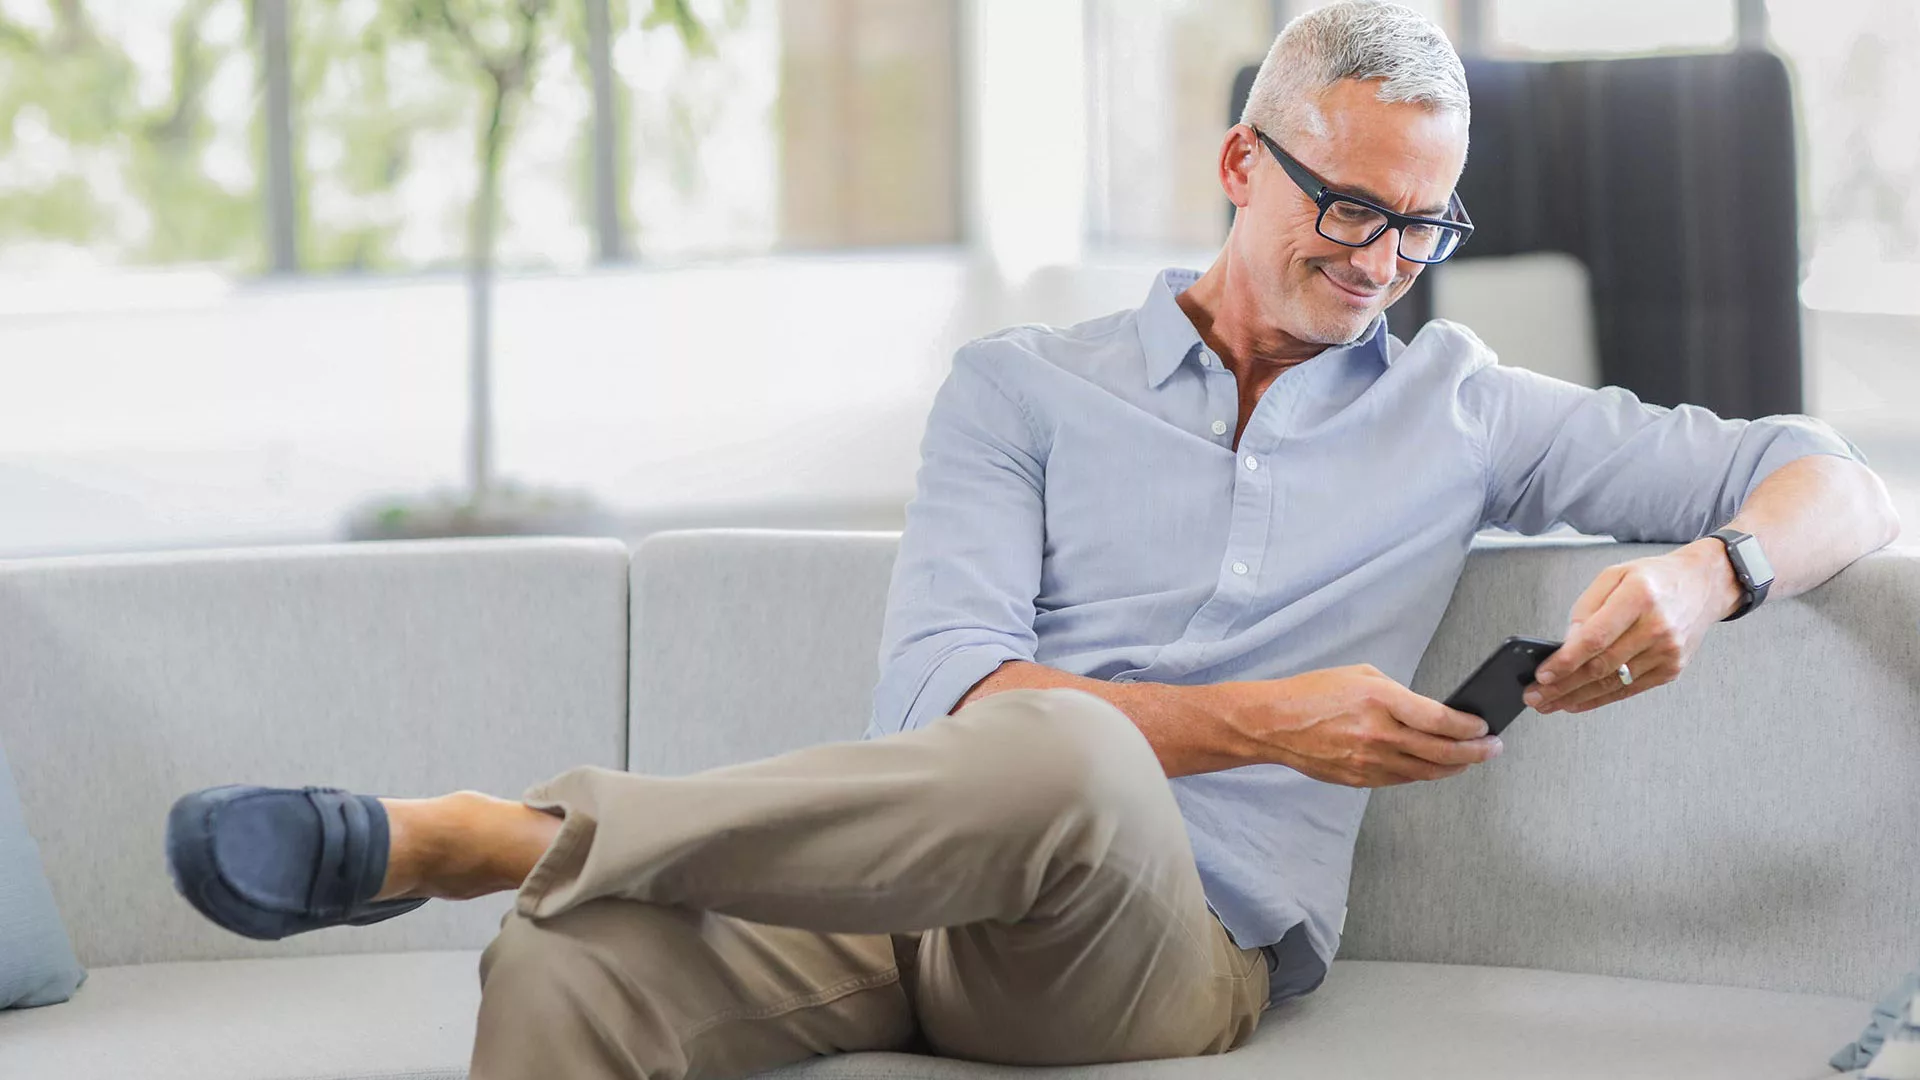 Man sitting on couch looking at ihear on smartphone